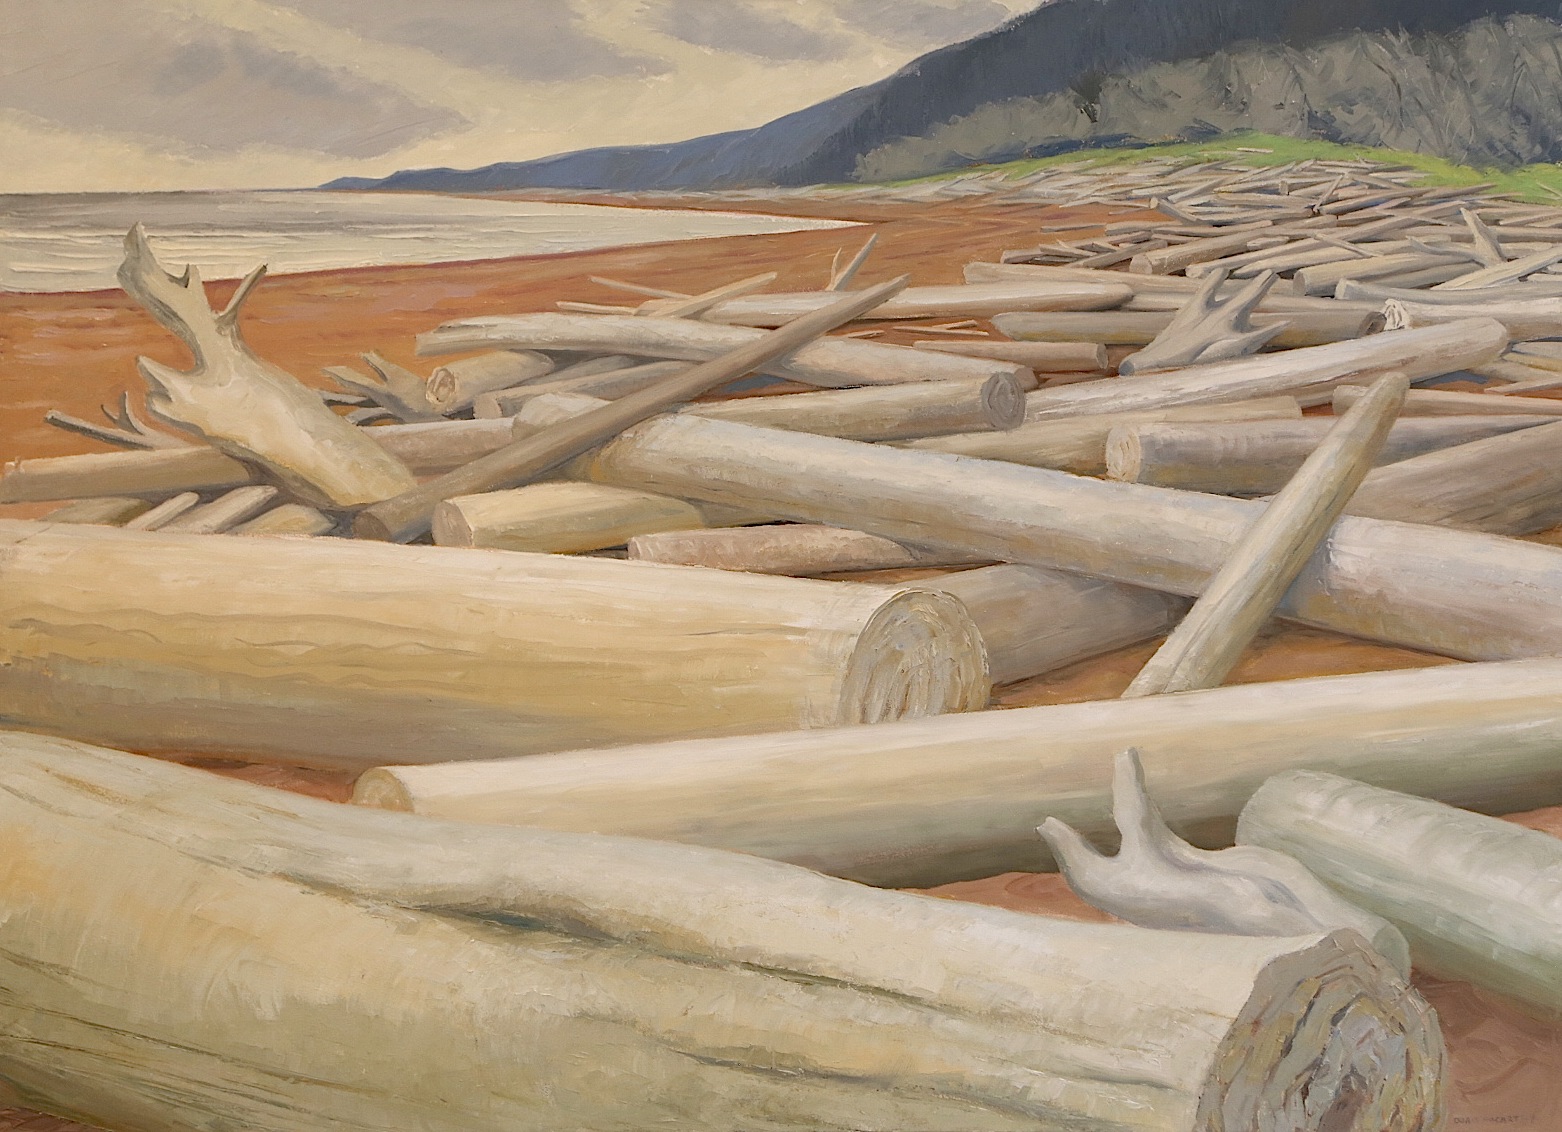 Painting of cut logs lining the shore with water meeting the sky and hills in the background.